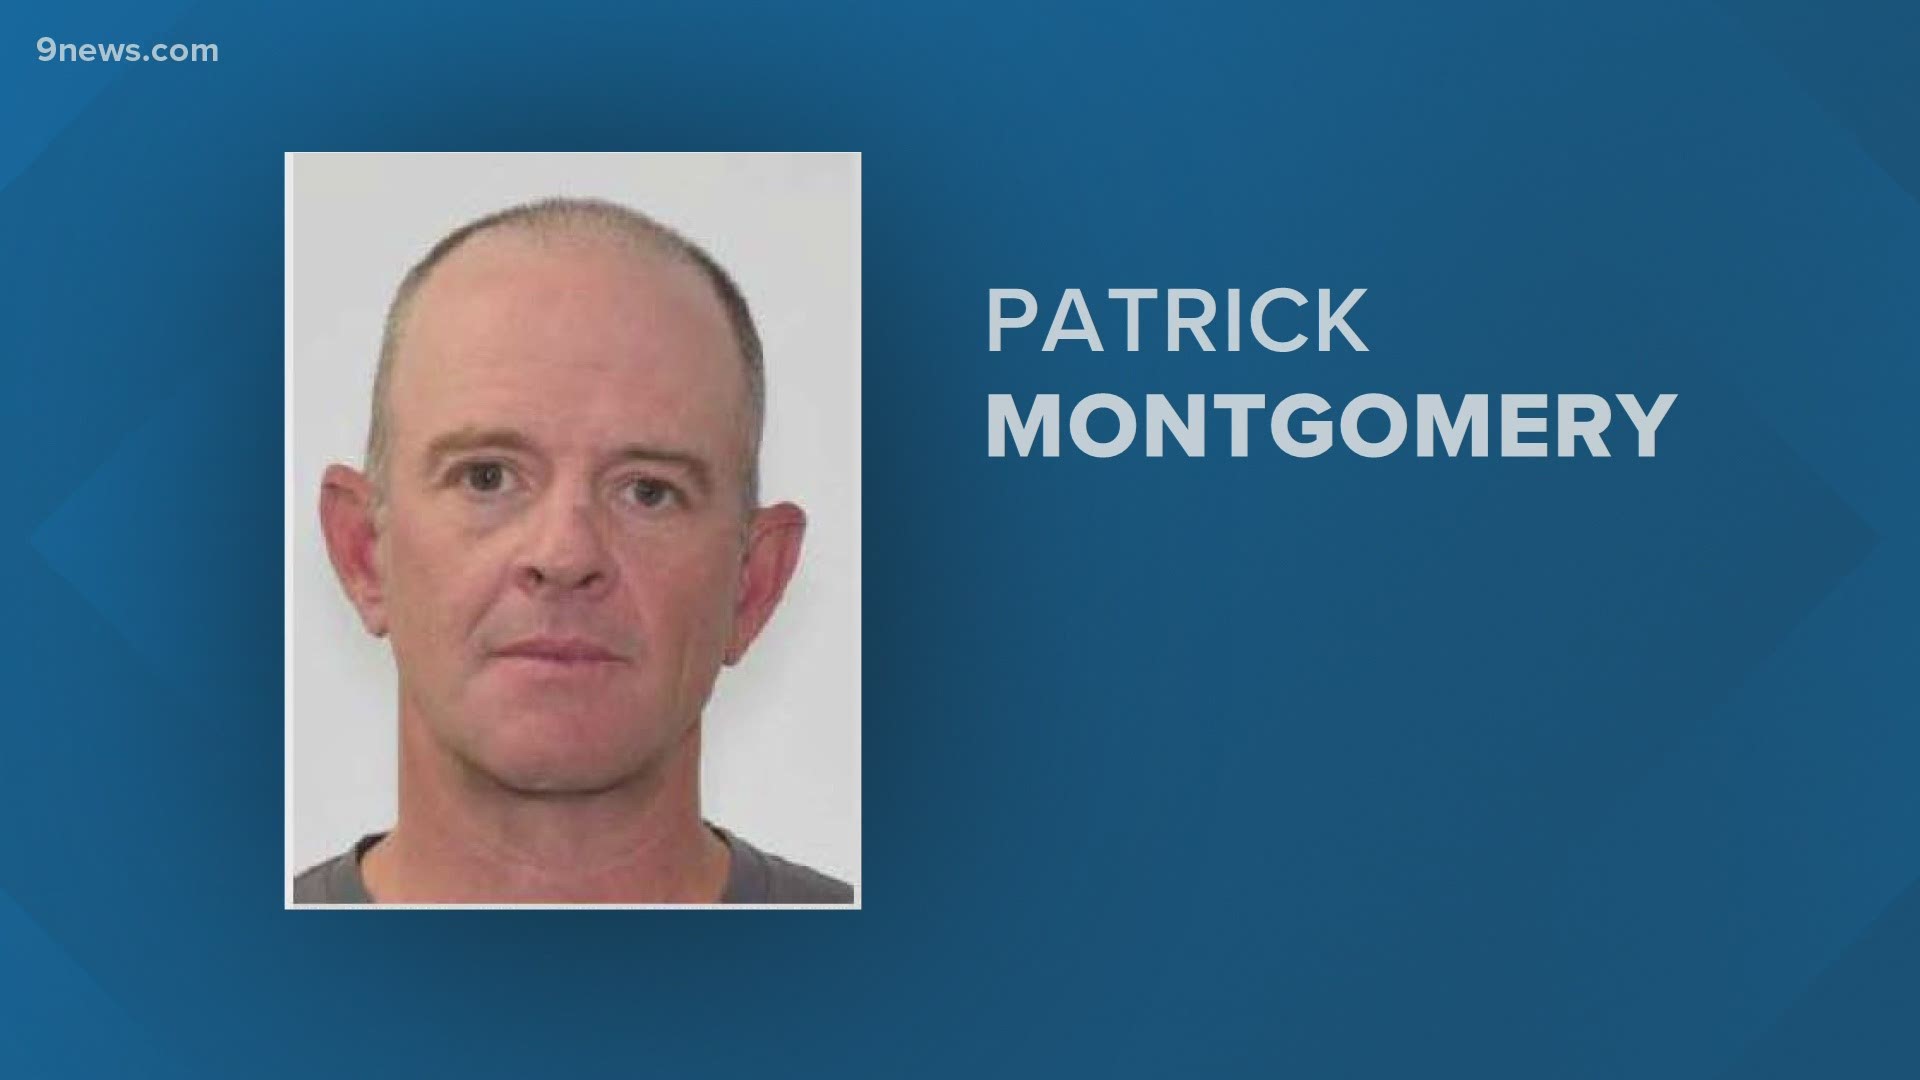 Another Colorado man, Patrick Montgomery, is facing federal charges following the storming of the Capitol on Jan. 6.